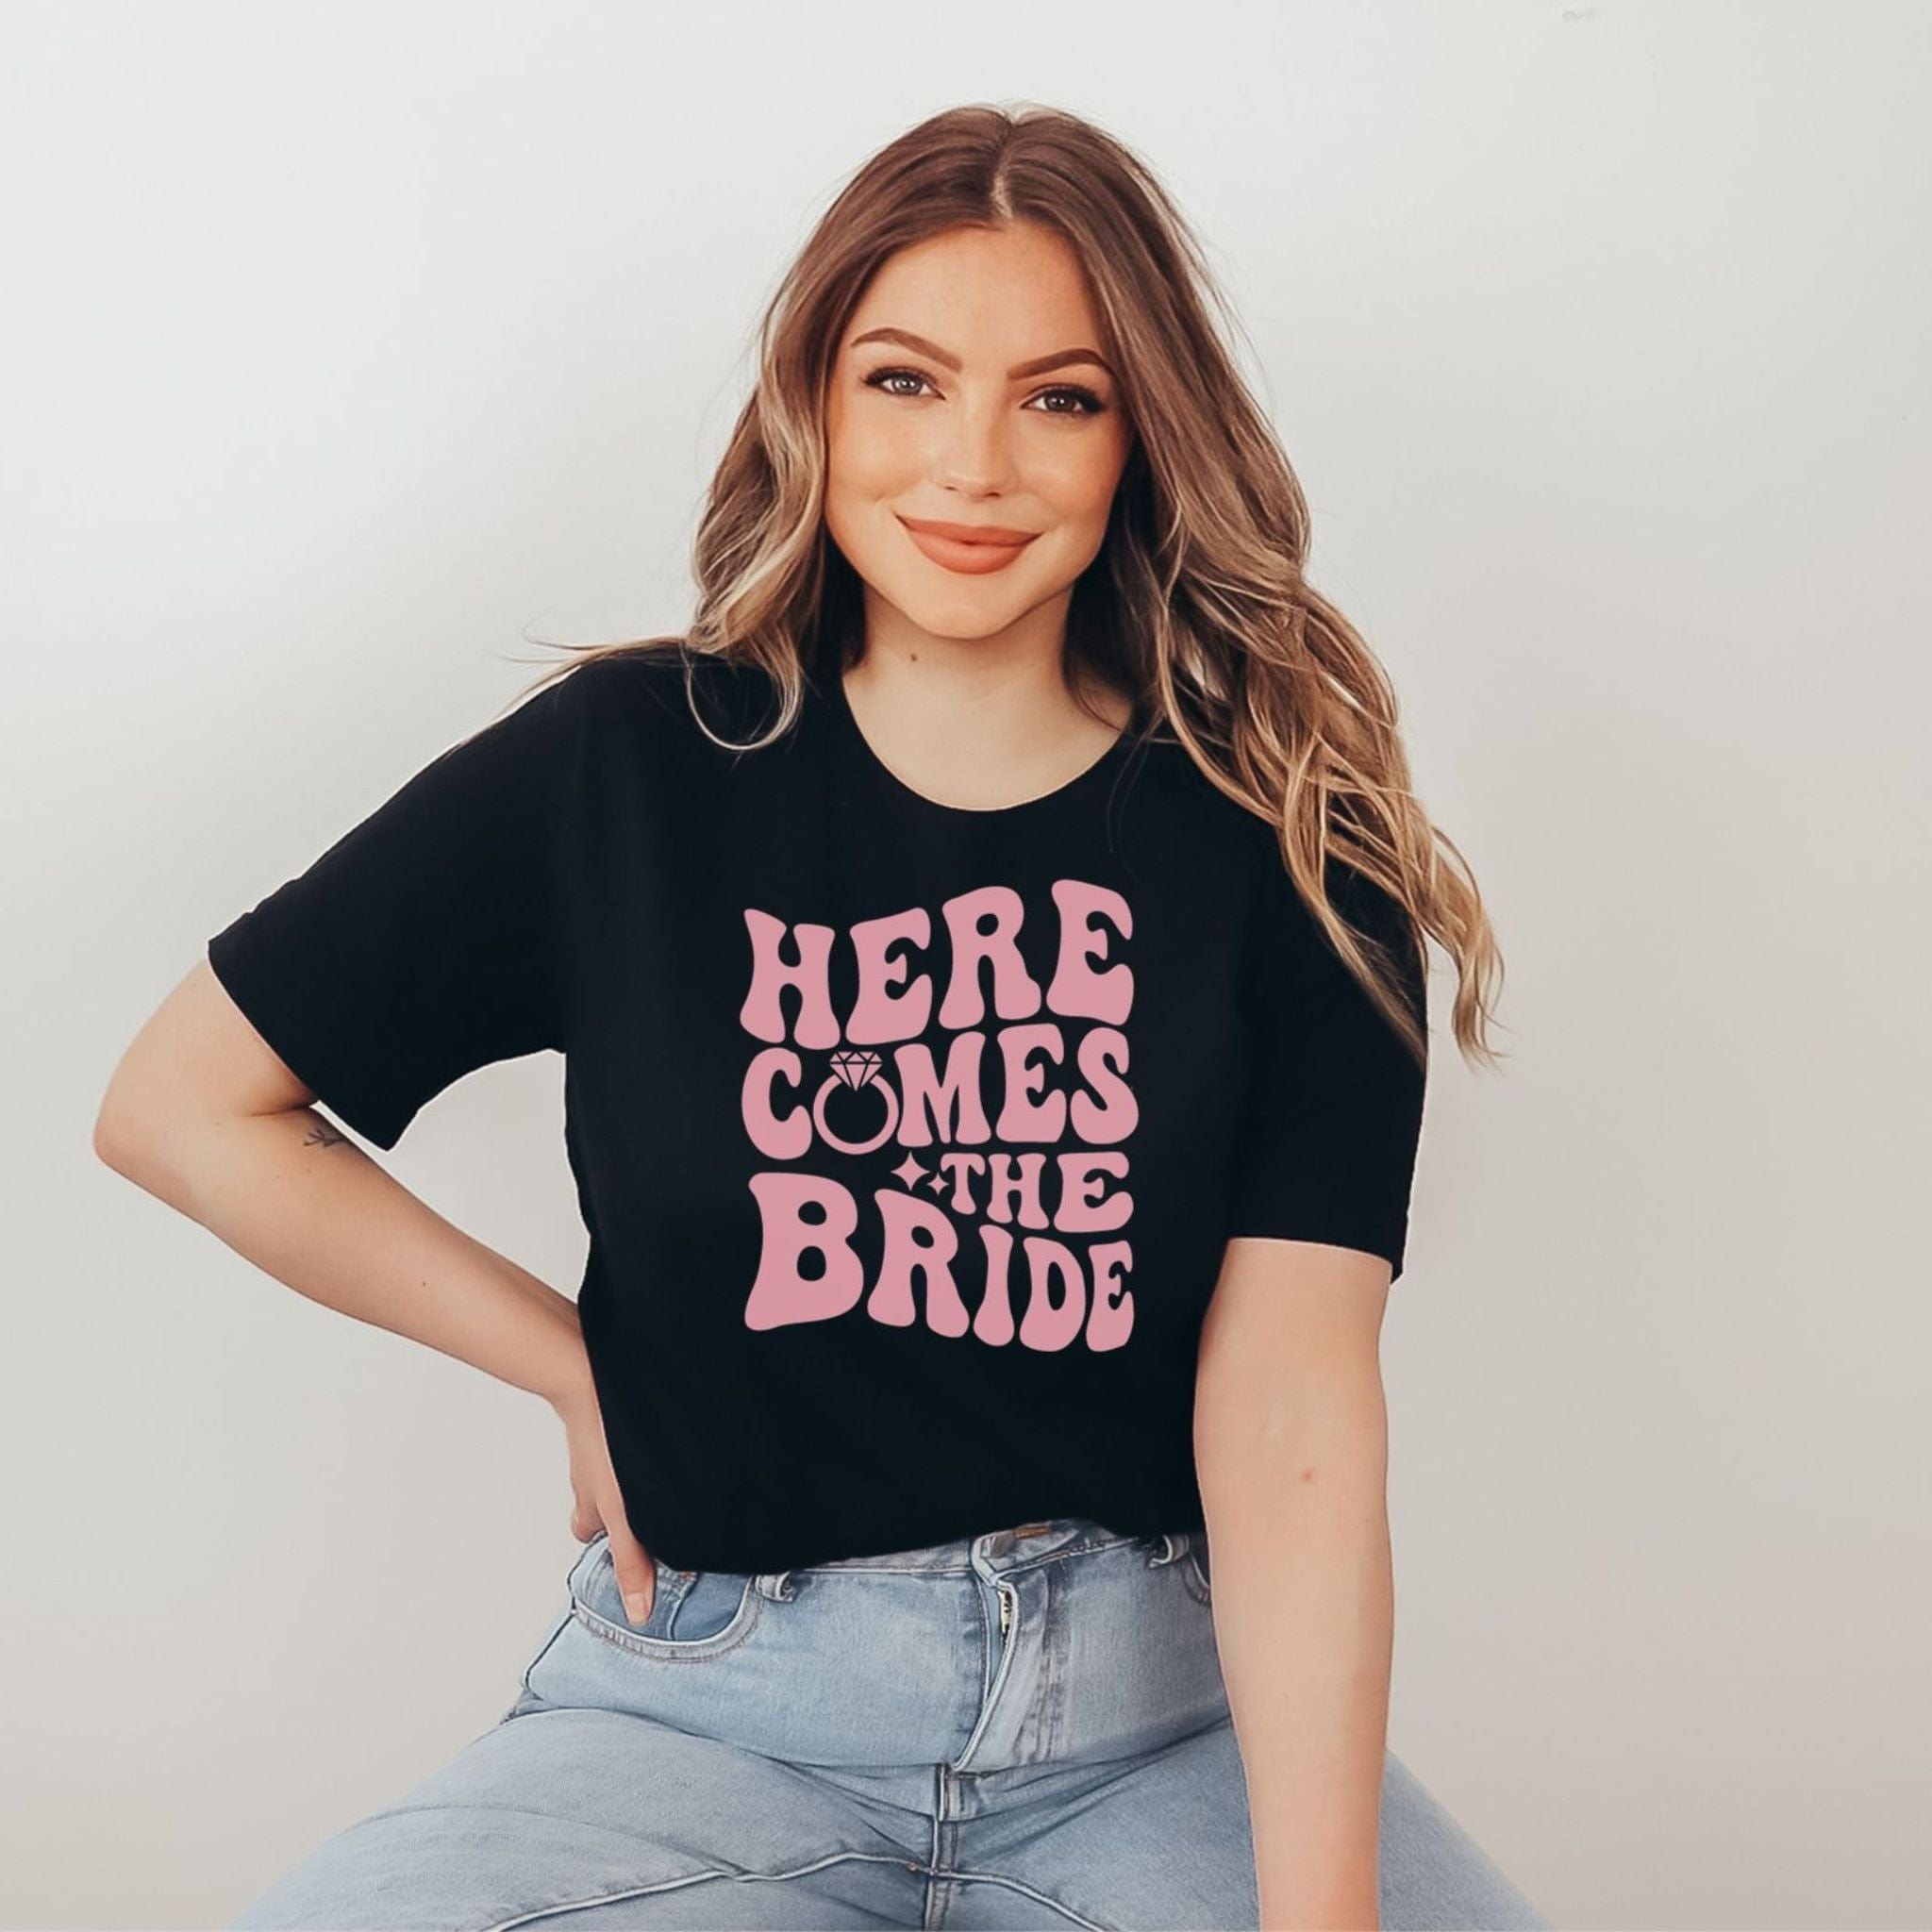 Here comes the Bride T-Shirt